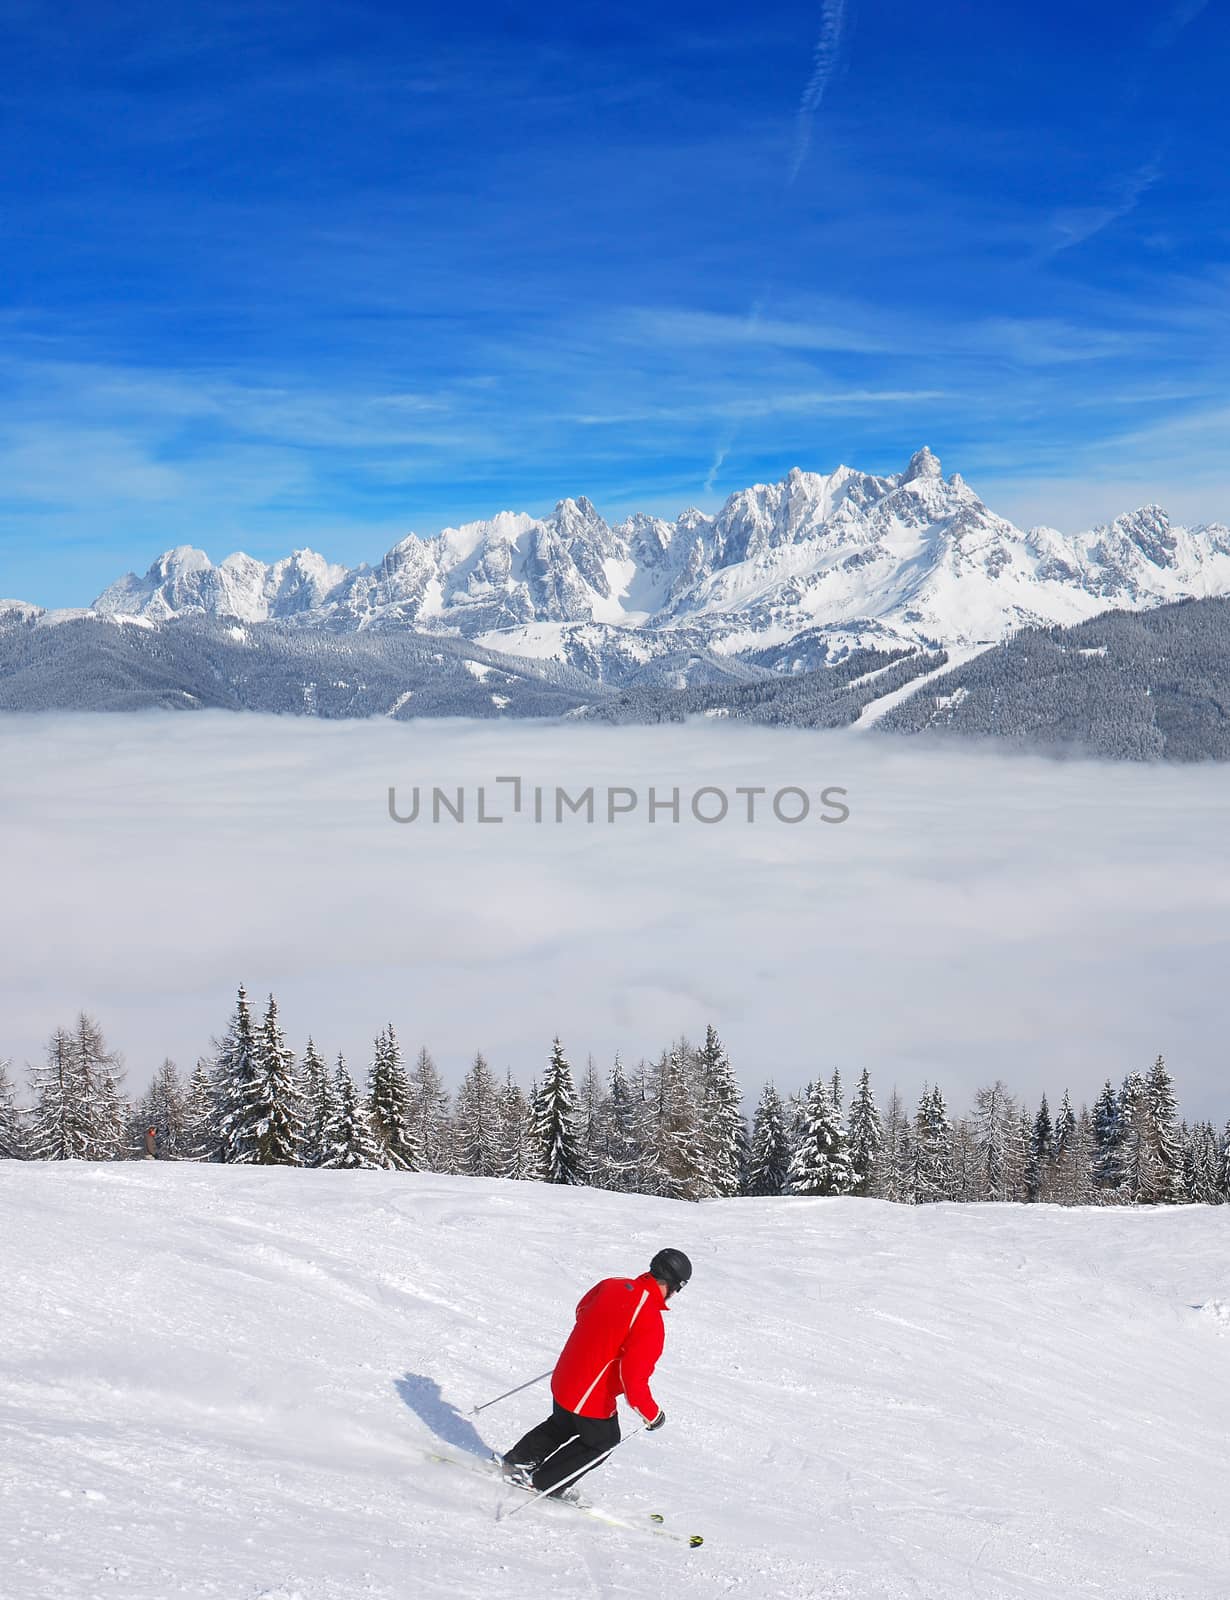 Separate skier on the slopes, riding above the clouds